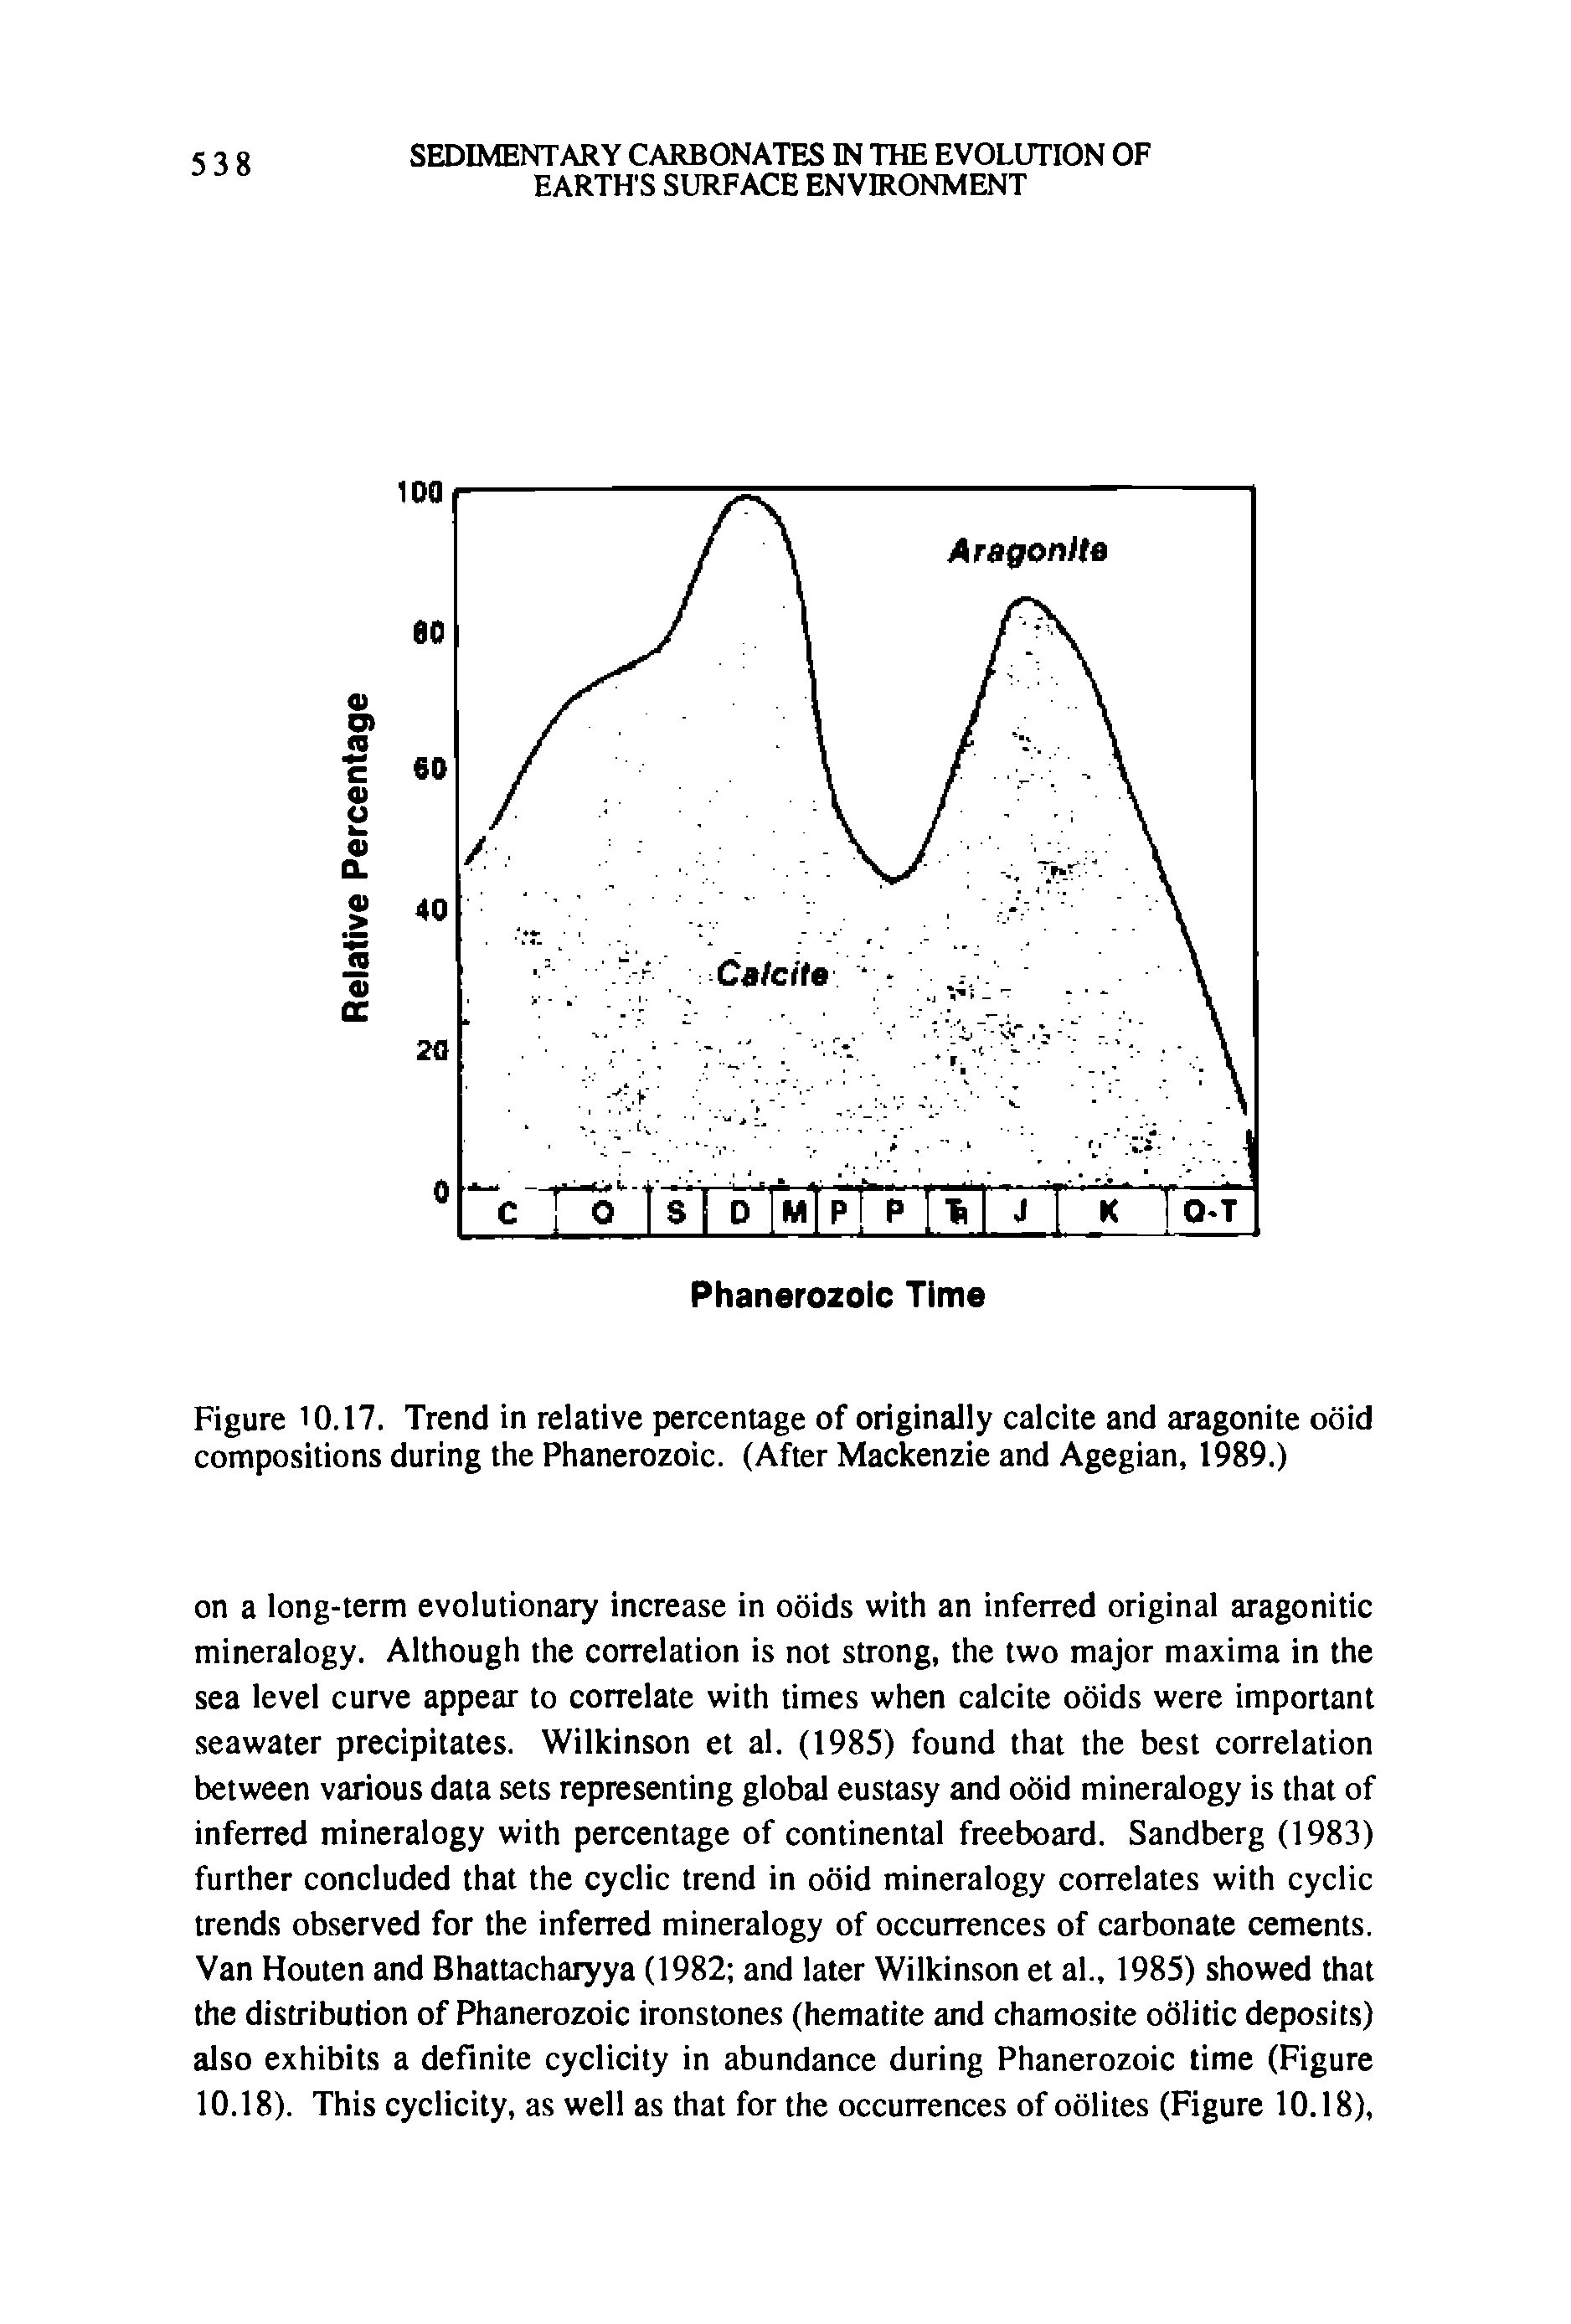 Figure 10.17. Trend in relative percentage of originally calcite and aragonite ooid compositions during the Phanerozoic. (After Mackenzie and Agegian, 1989.)...